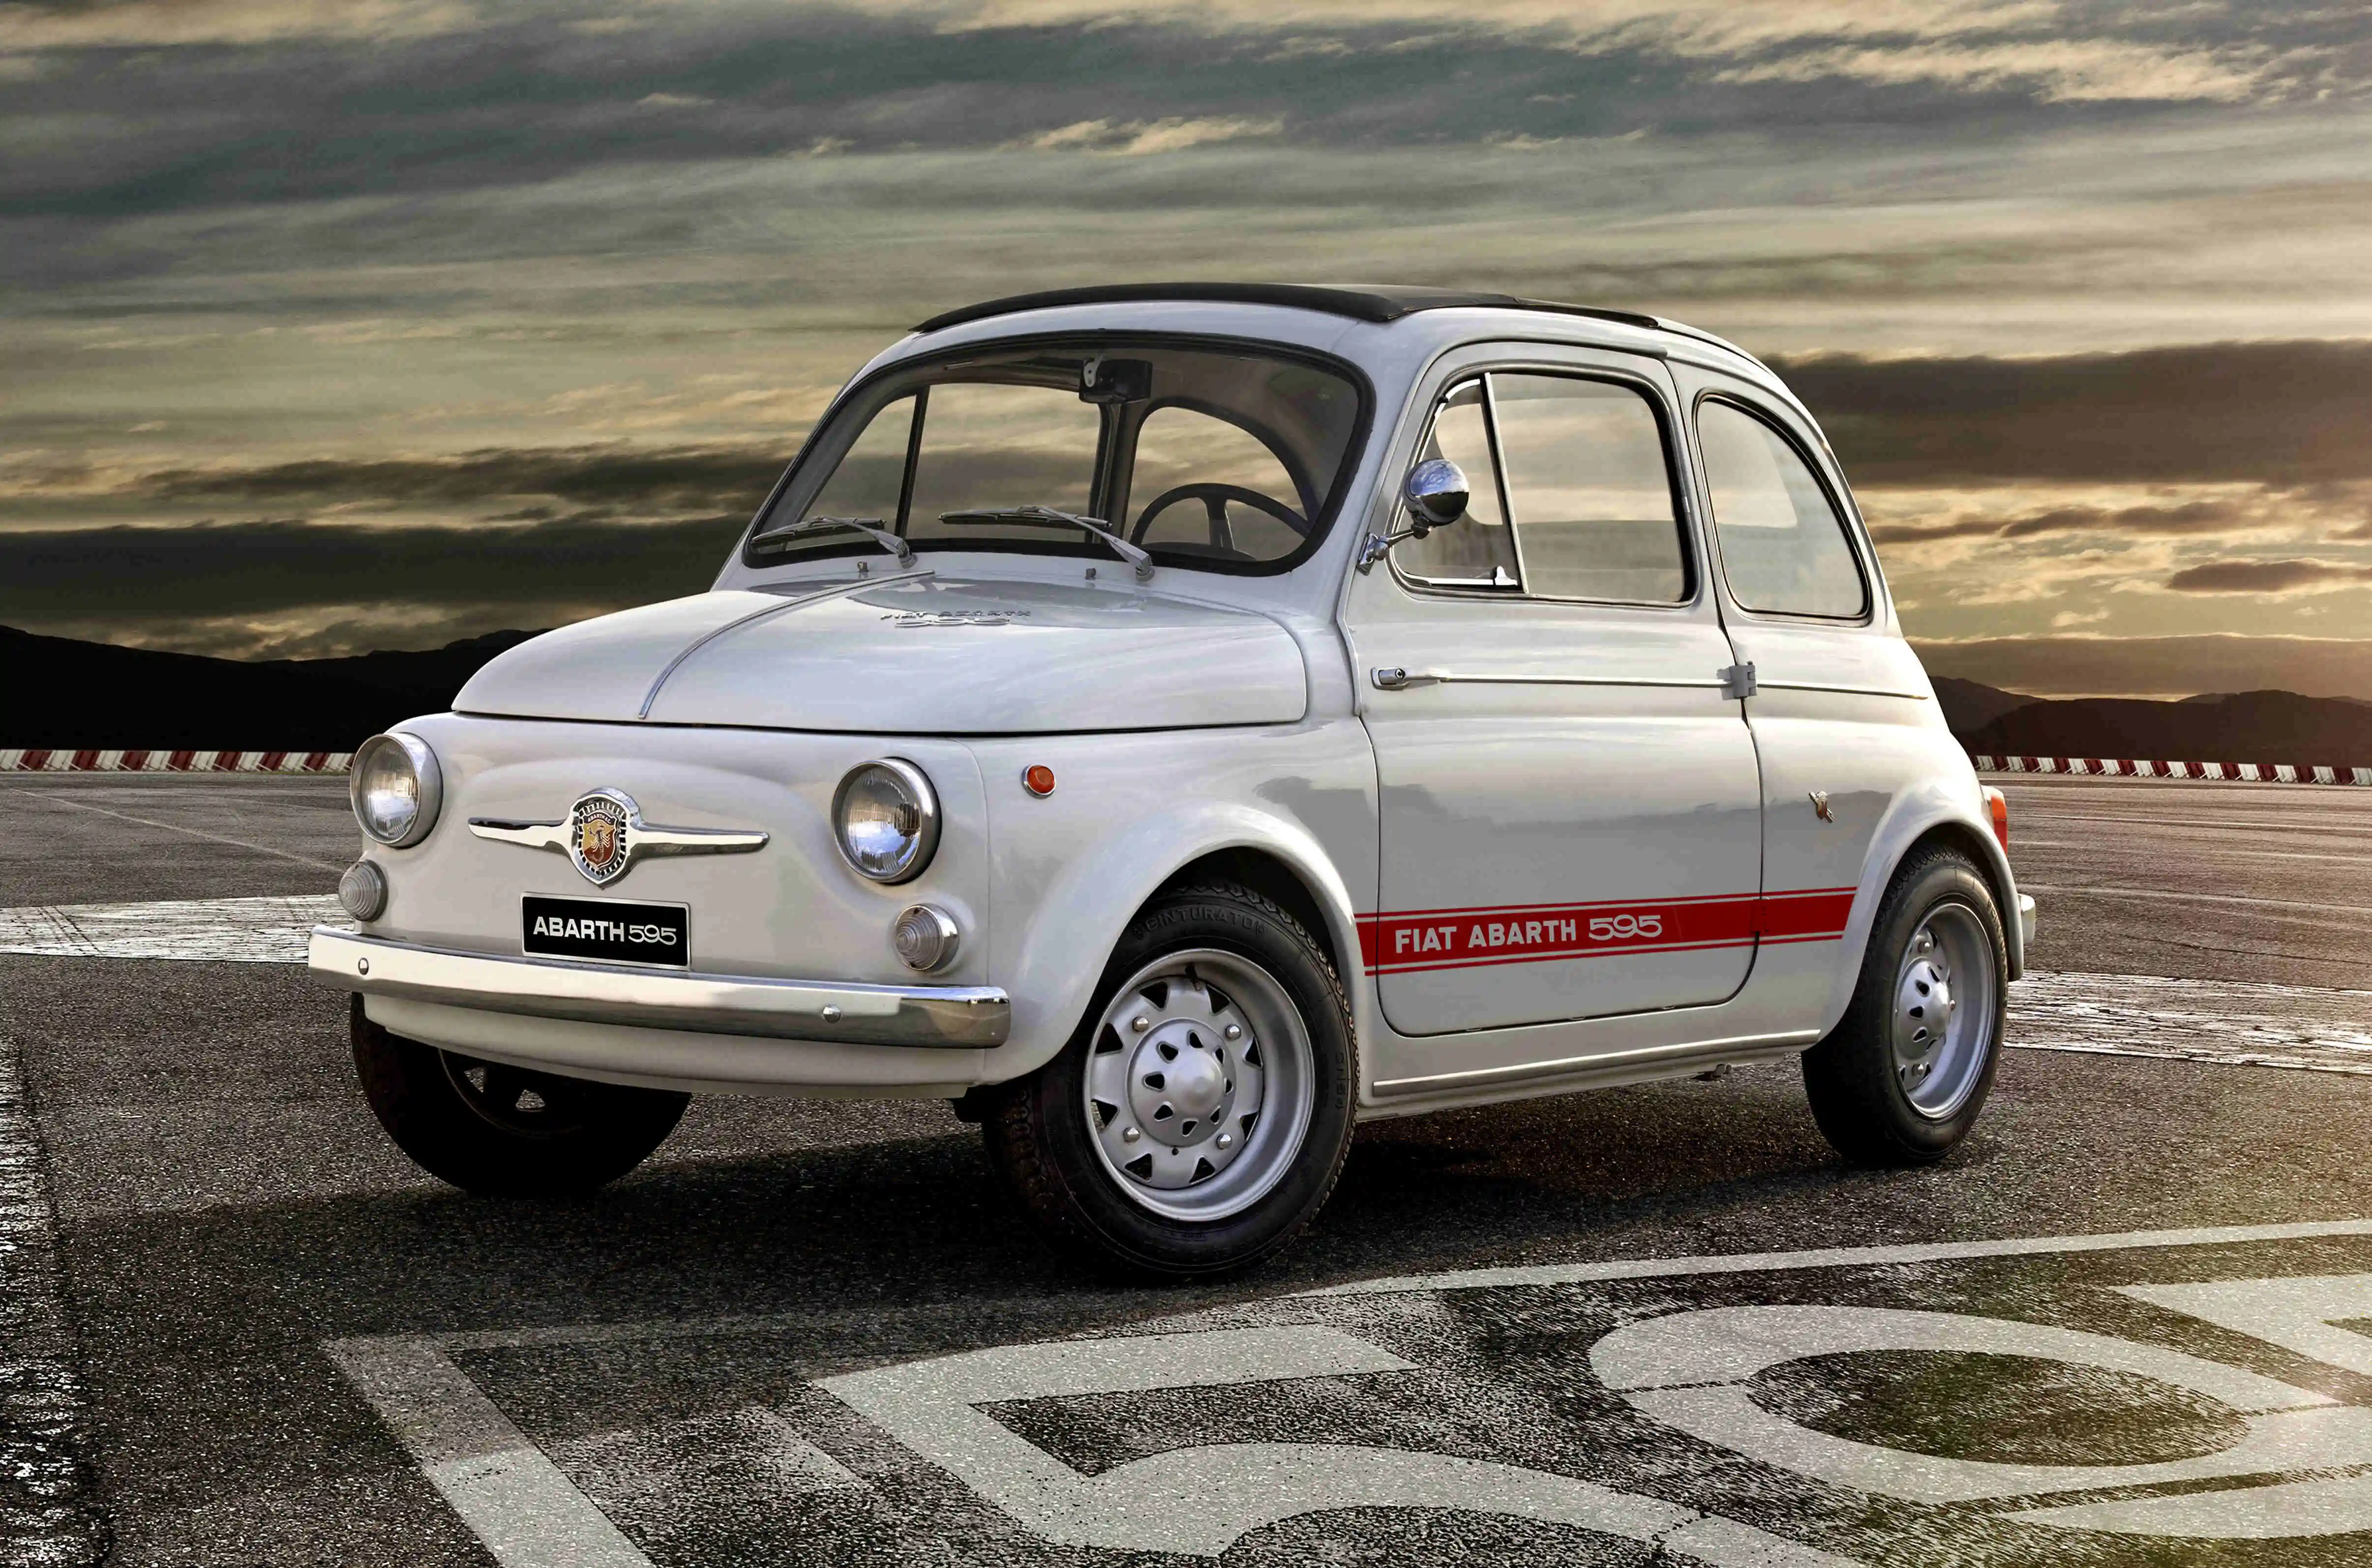 Abarth 595. The little pest